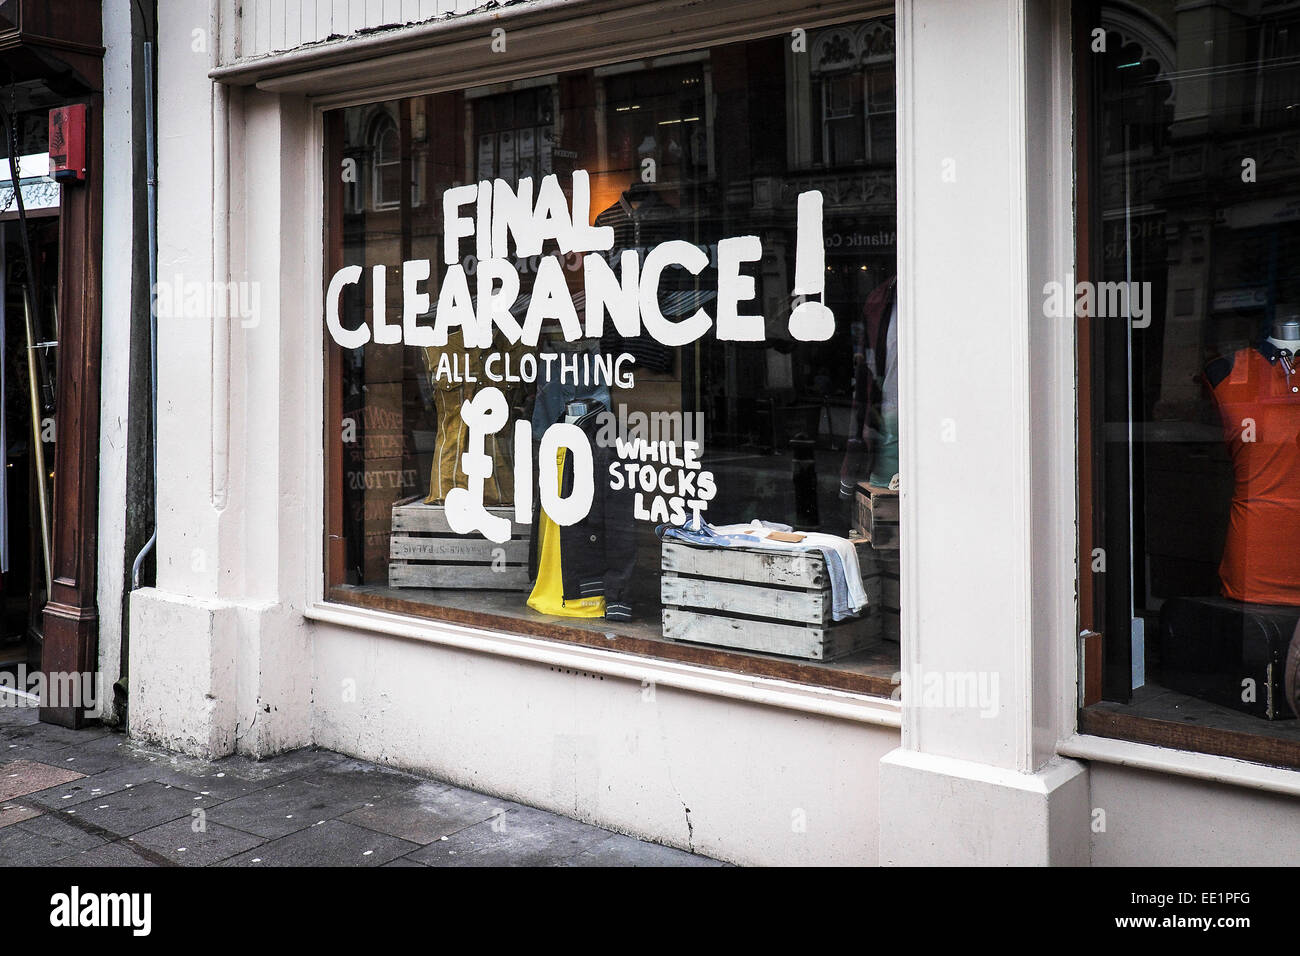 Final Clearance sign in a shop window in Cardiff. Stock Photo